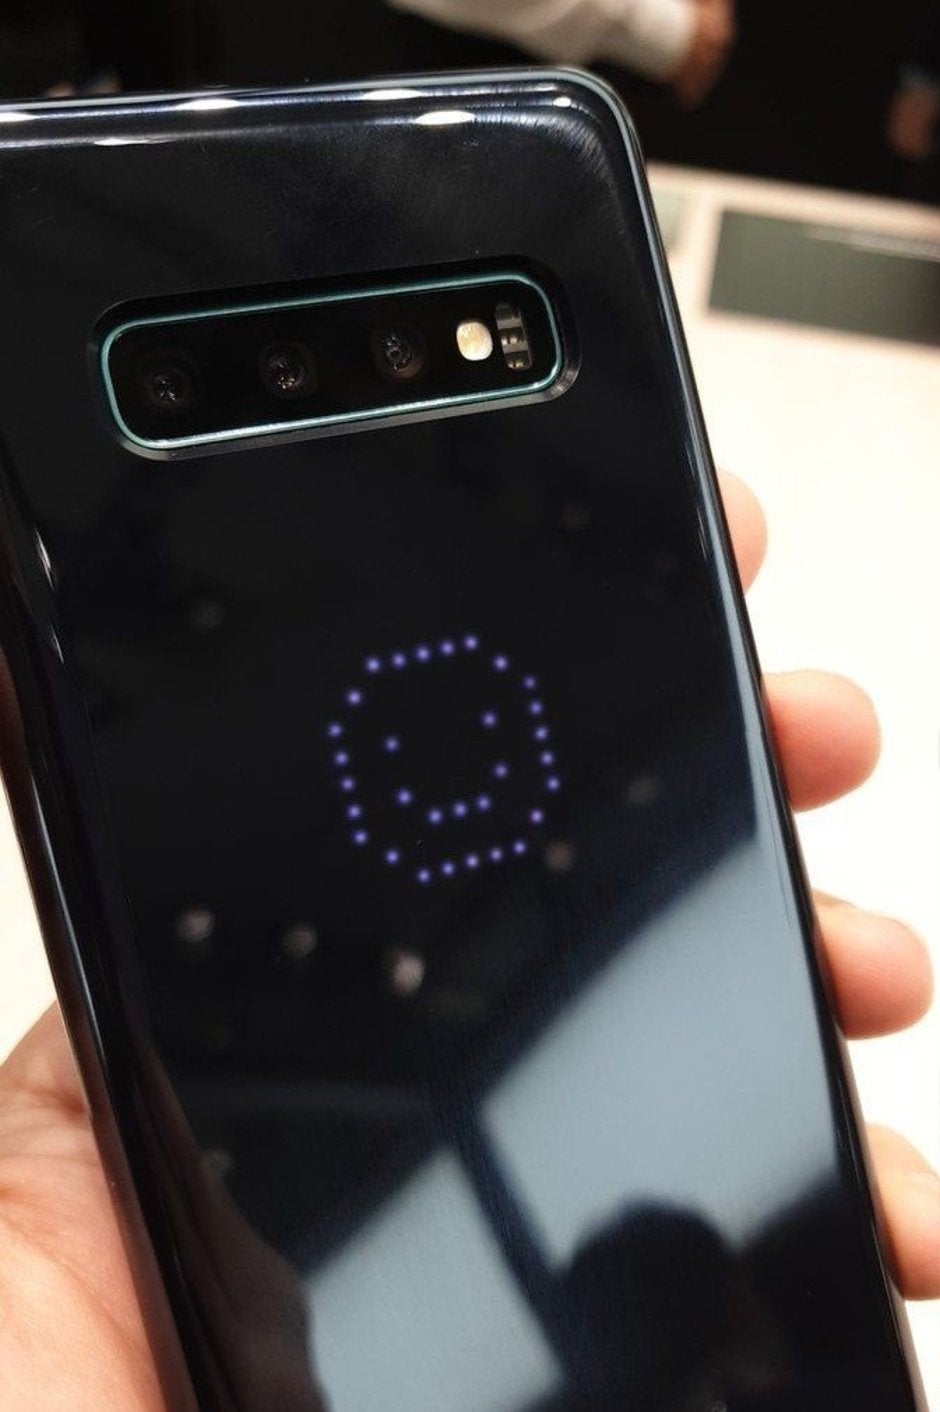 The future is here! - The Galaxy S10's fancy LED case disables the phone's NFC